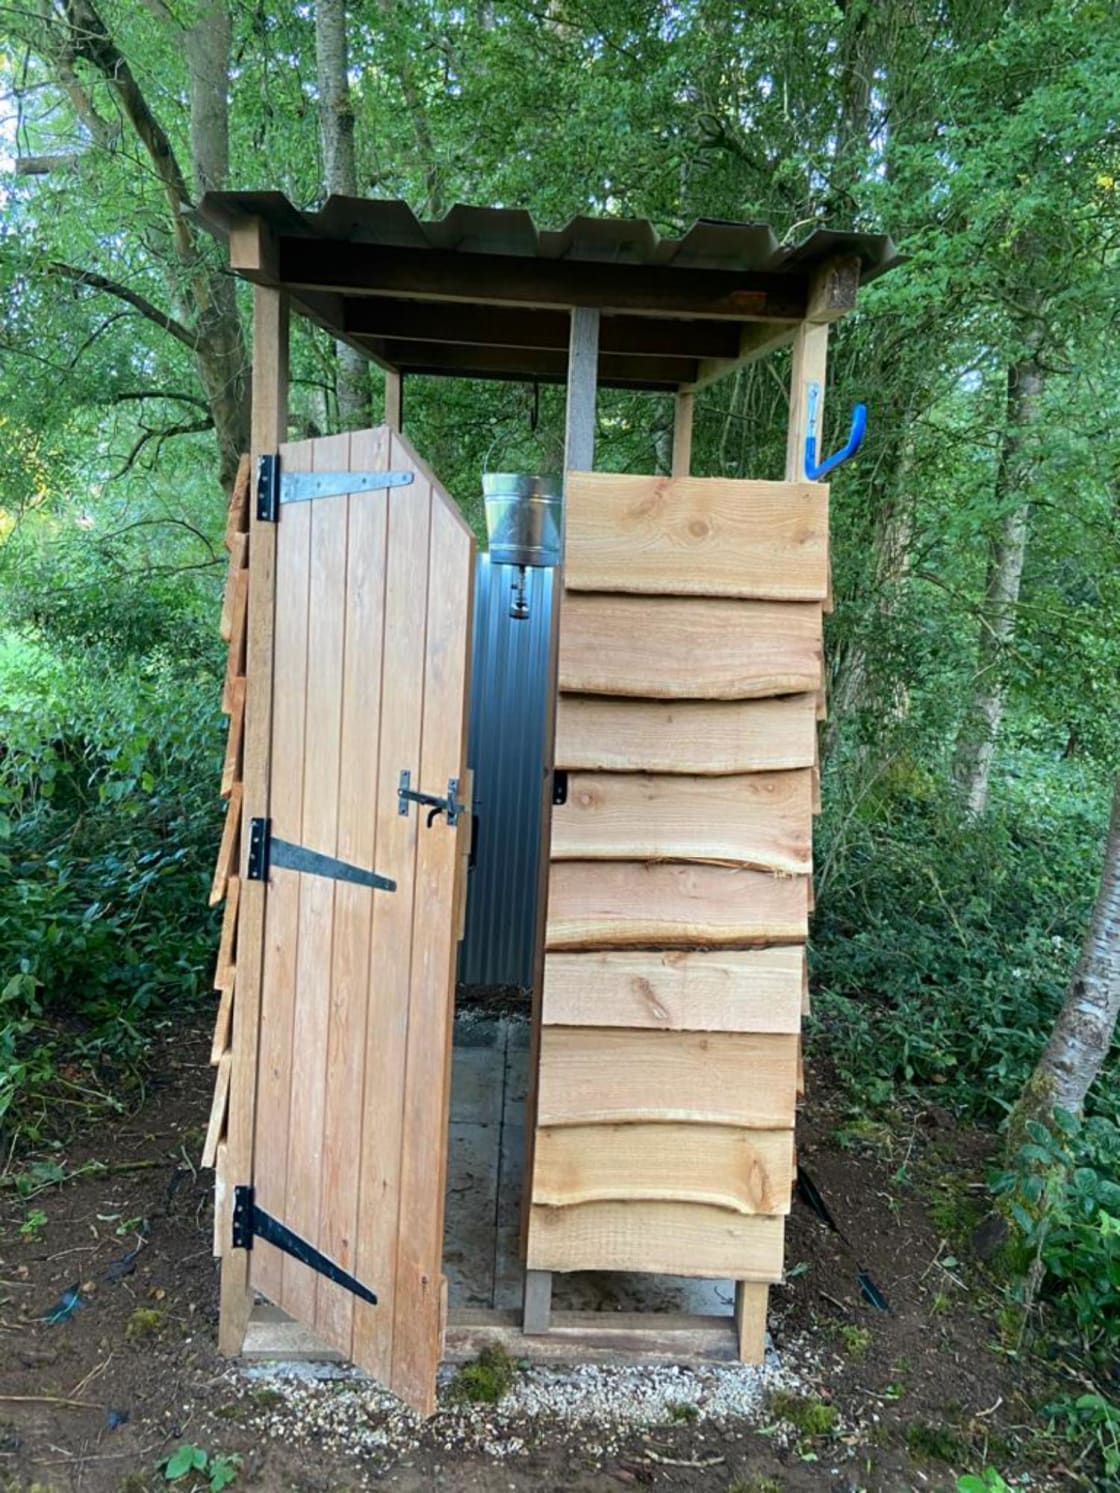 'Heat your own water' showers at the Yurt Camp...very easy and a good 3 min shower!